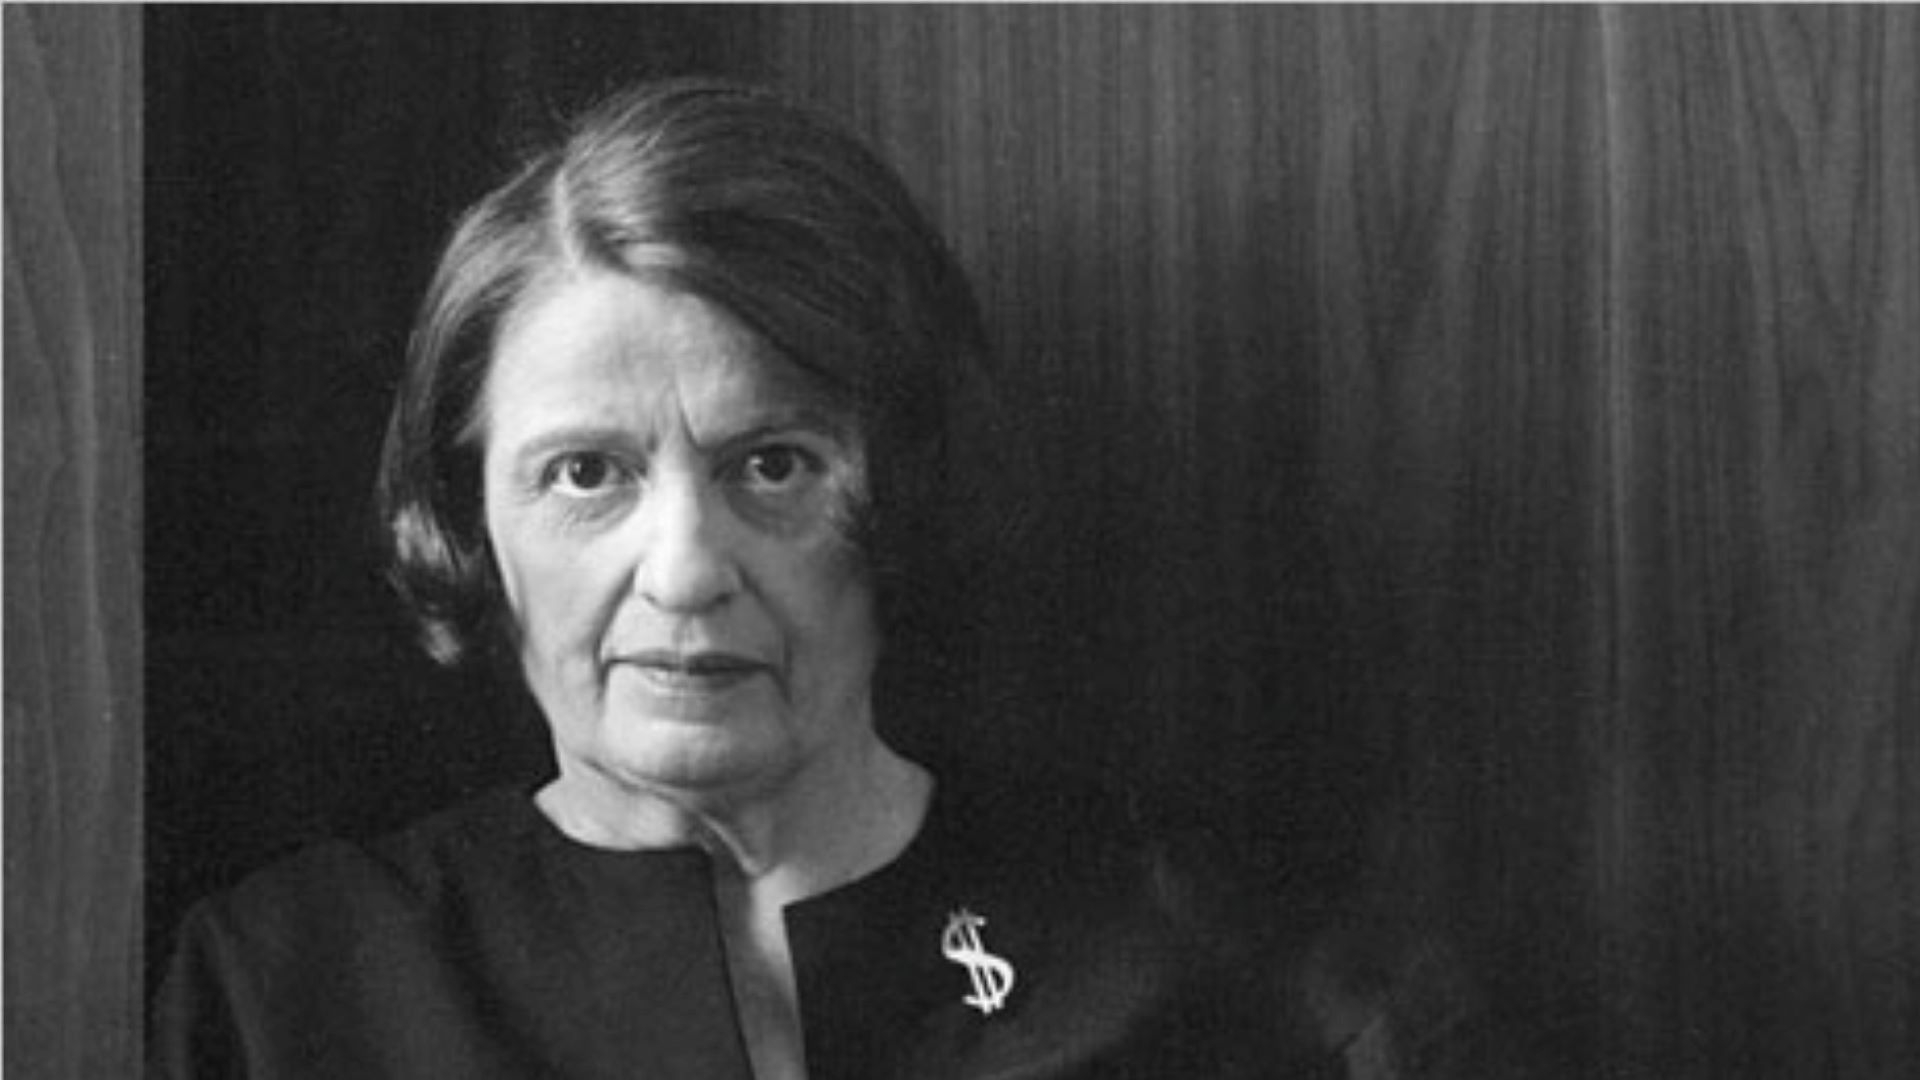 Modernity is unthinkable without capitalism, yet Ayn Rand defined capitalism as an unknown ideal, one whose benefits people did not understand